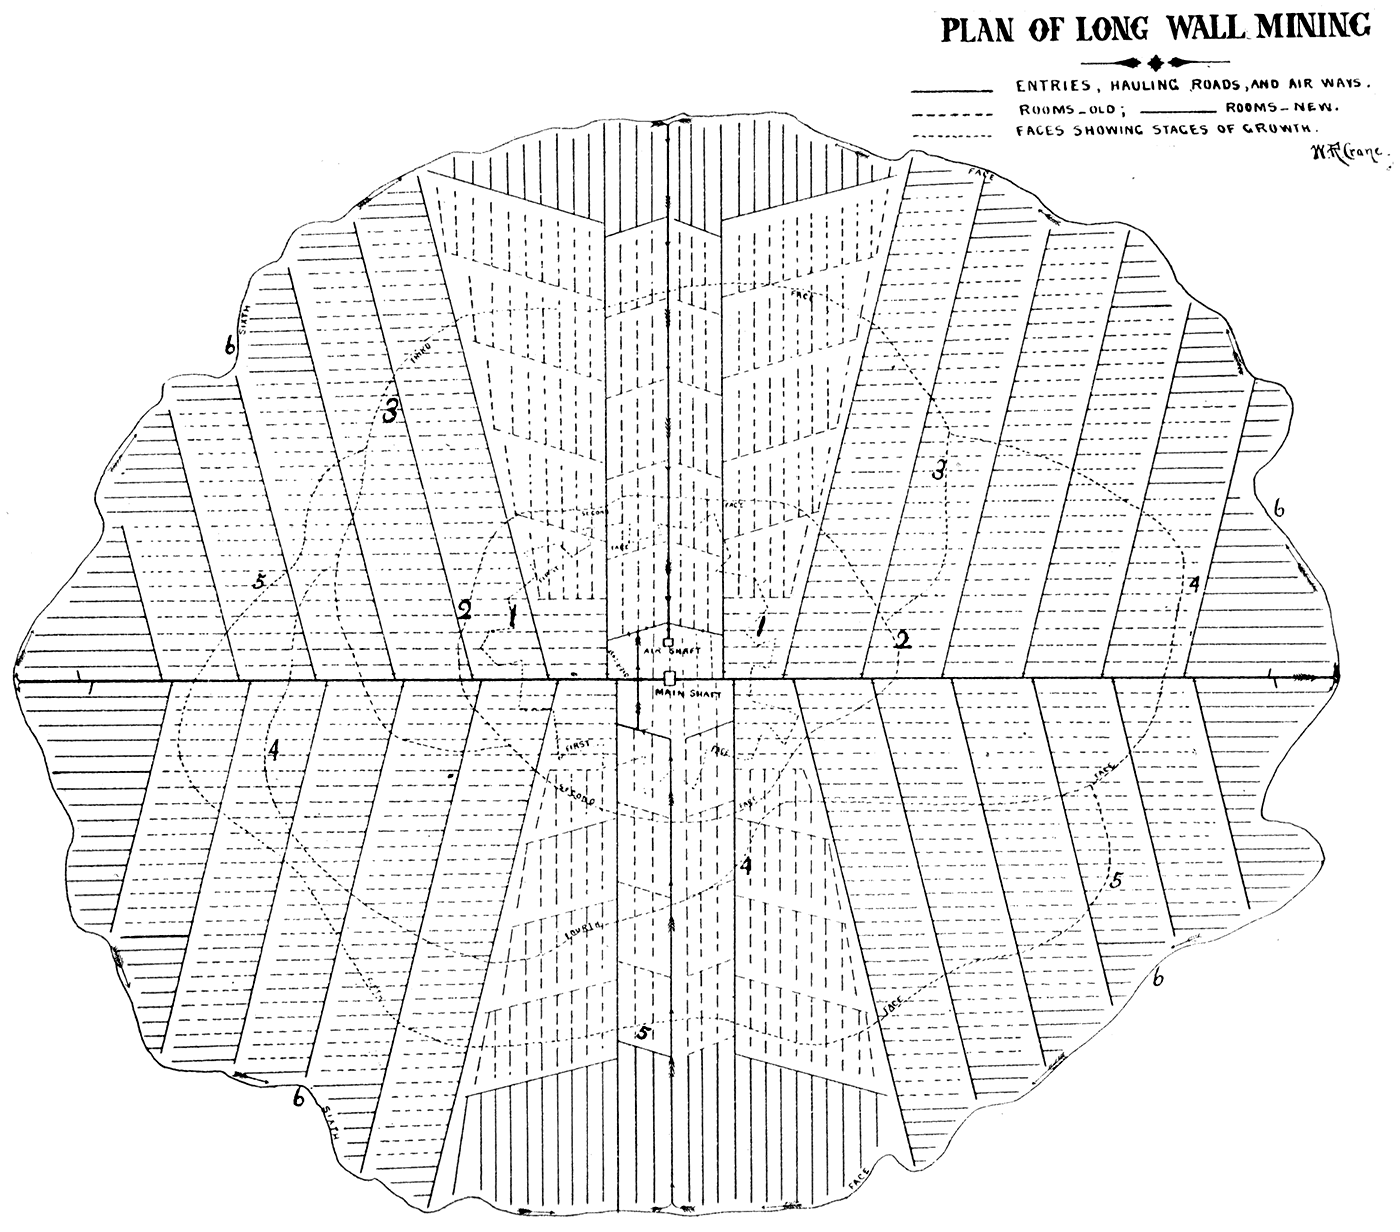 Plan of long wall system of mining.